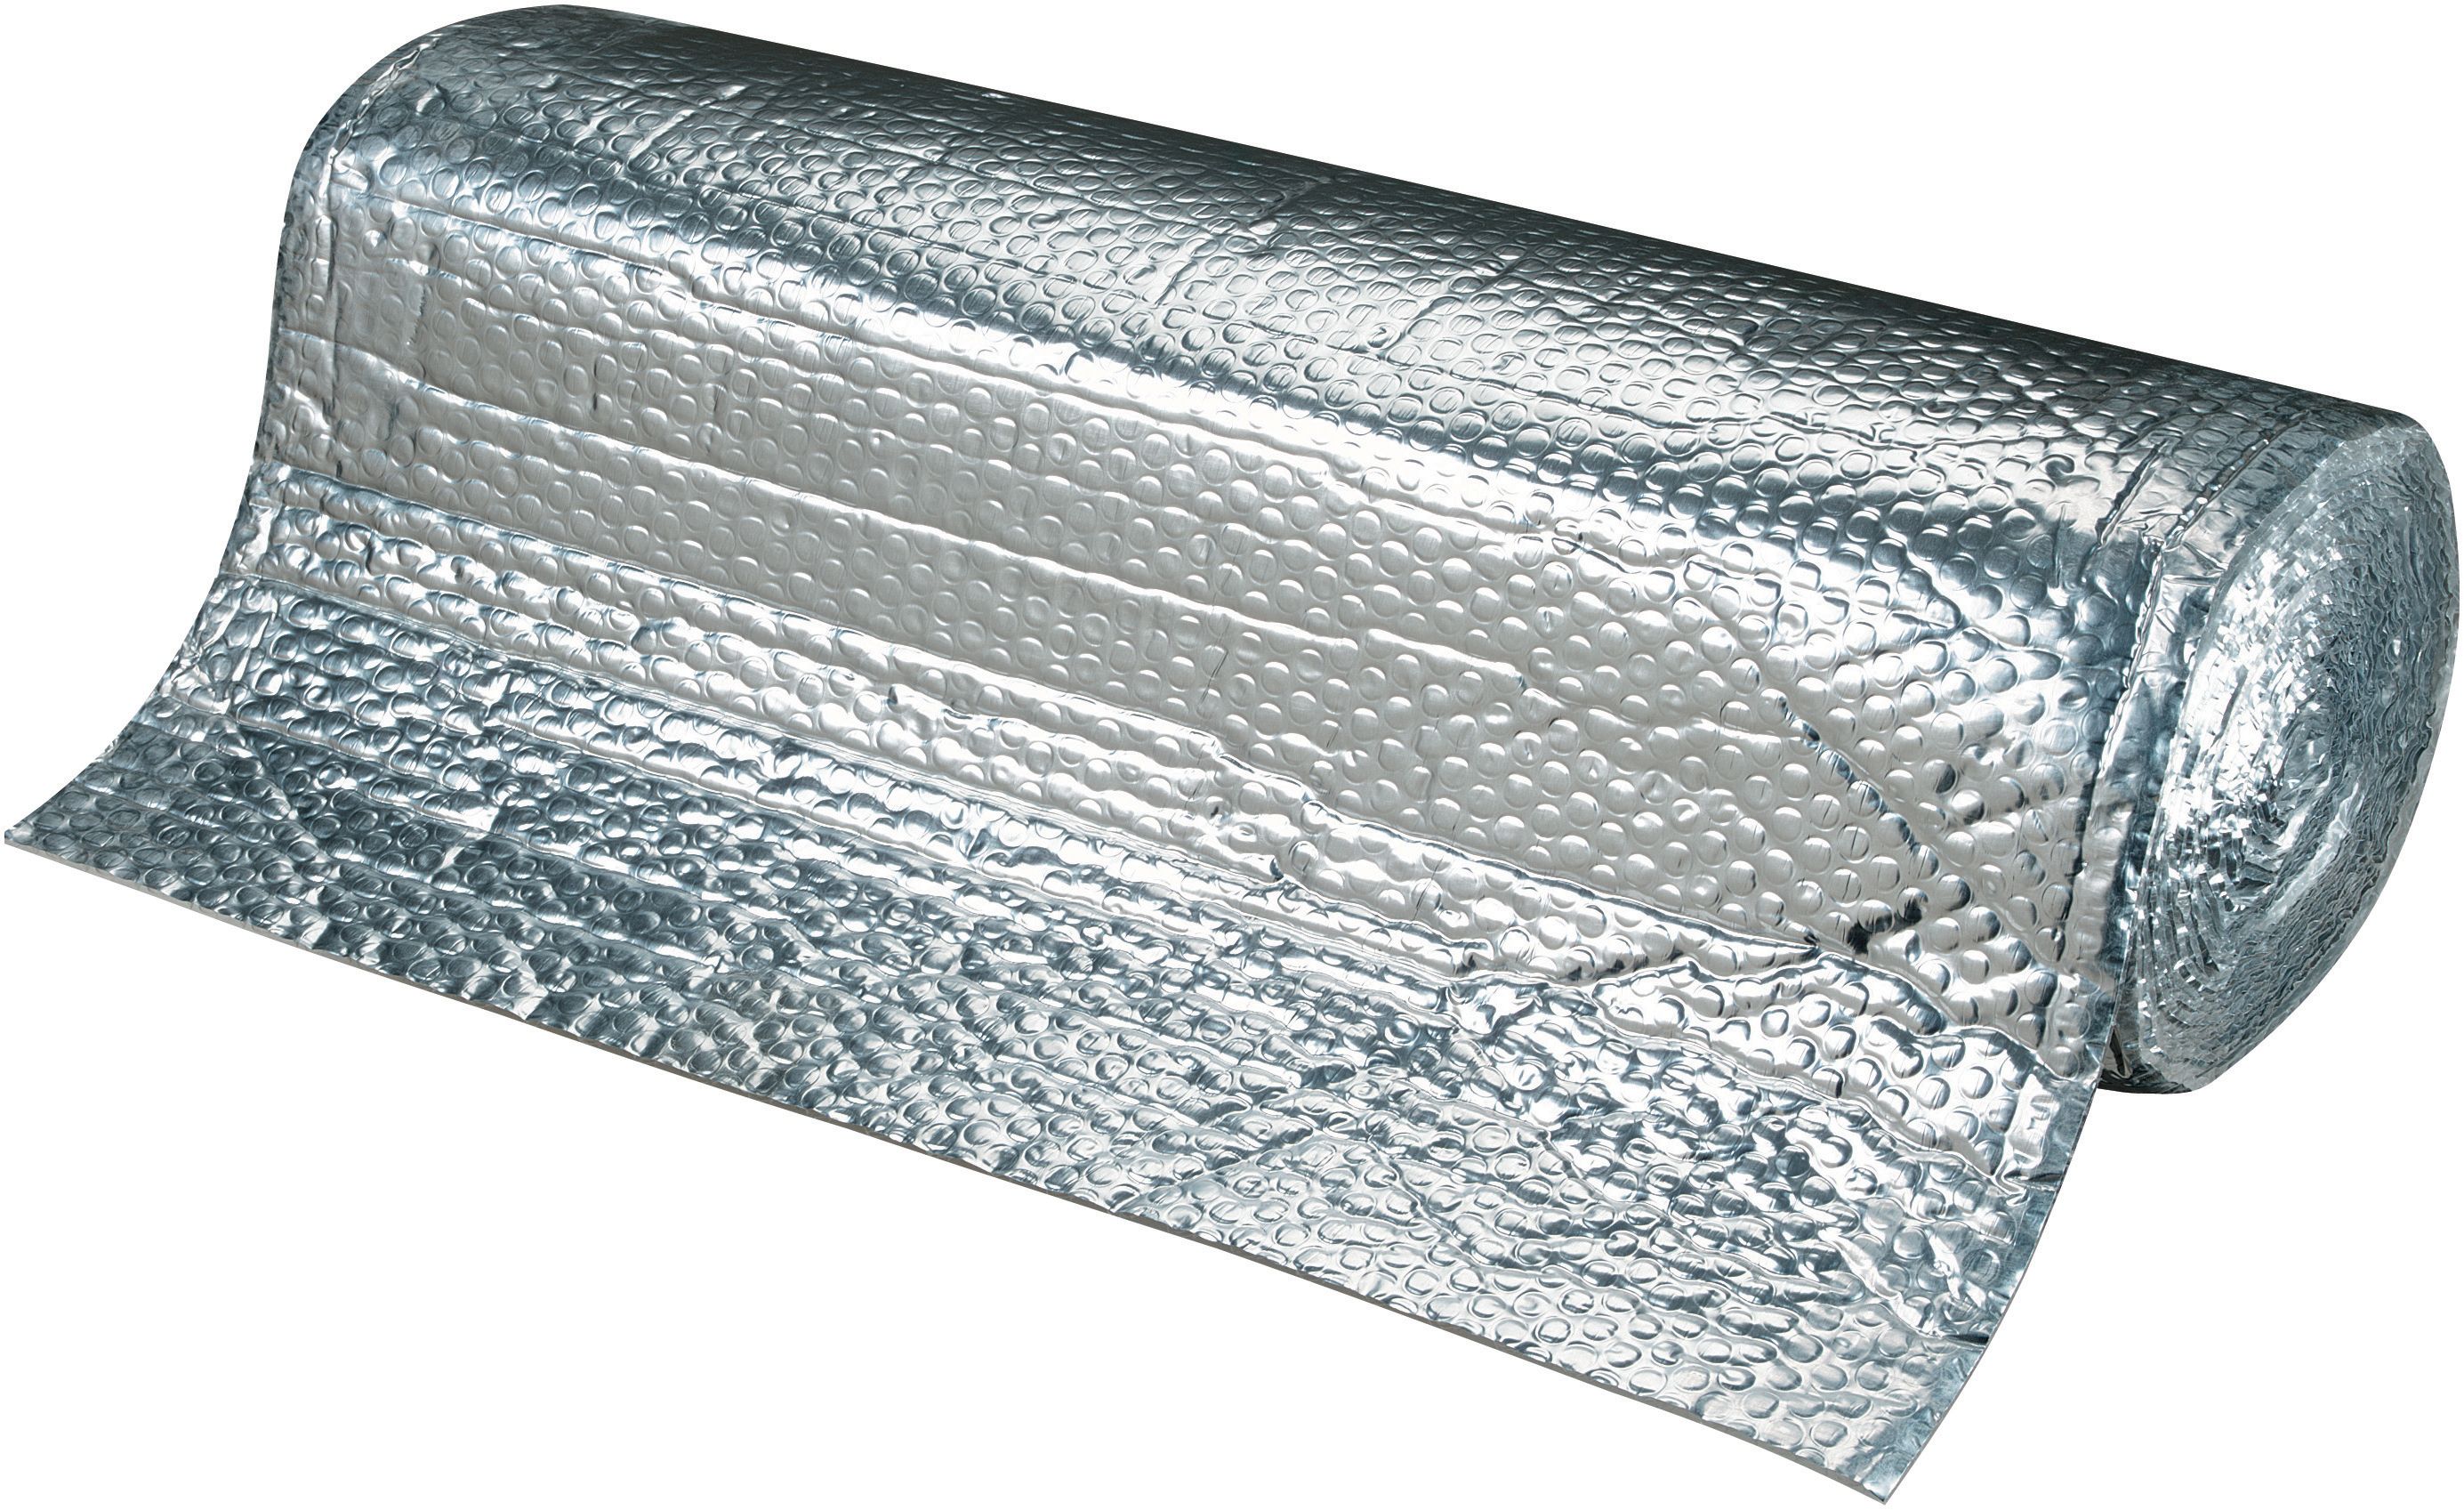 Image of Wickes Heat Reflective Silver Thermal Foil Insulation Aluminium Roll - 600mmx8m